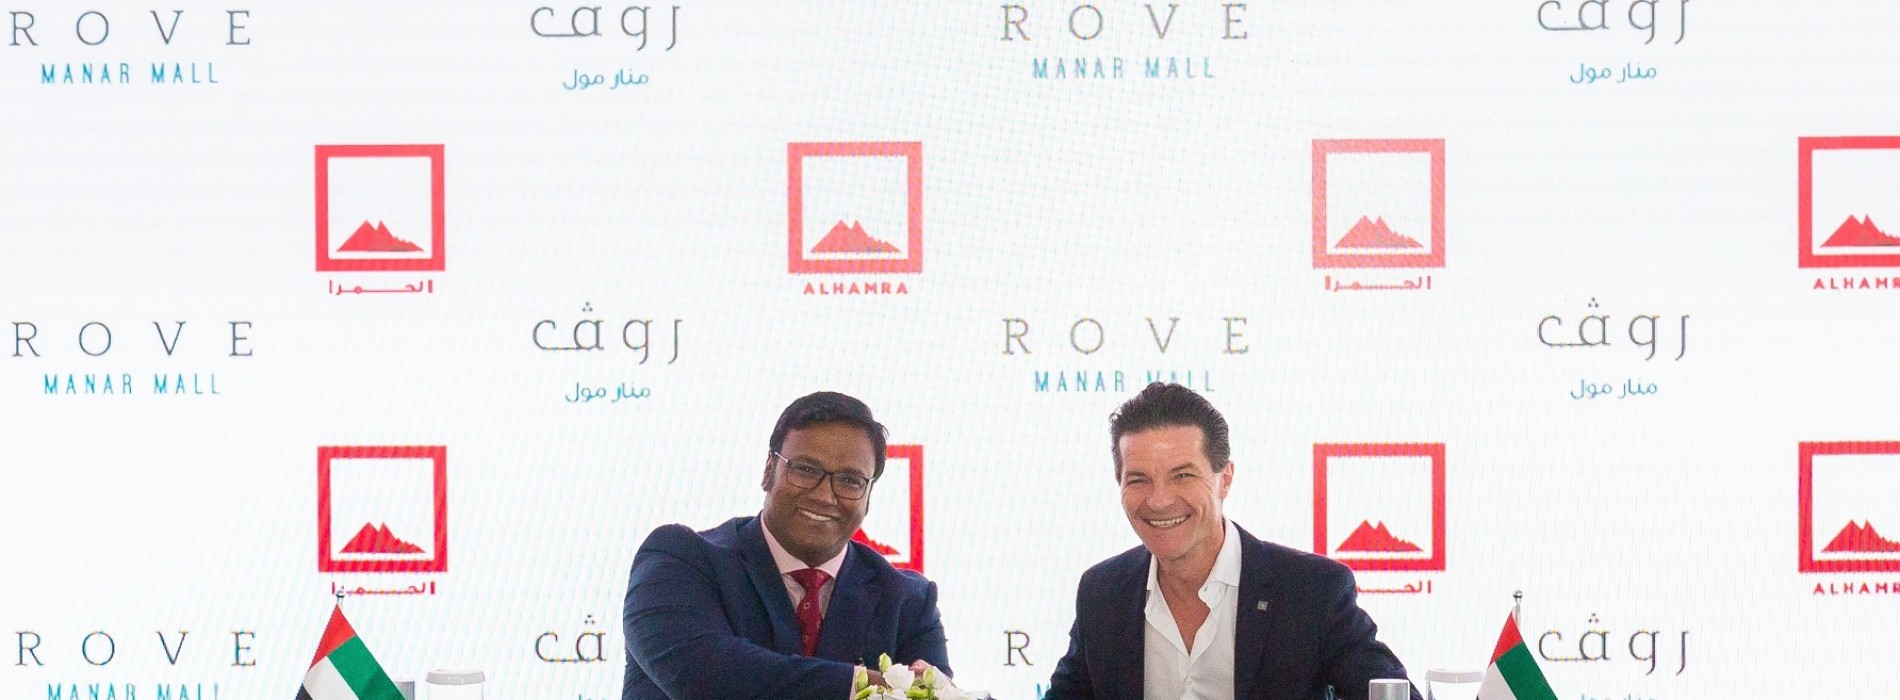 Rove Hotels signs agreement with Al Hamra for 250-room Rove Manar Mall hotel